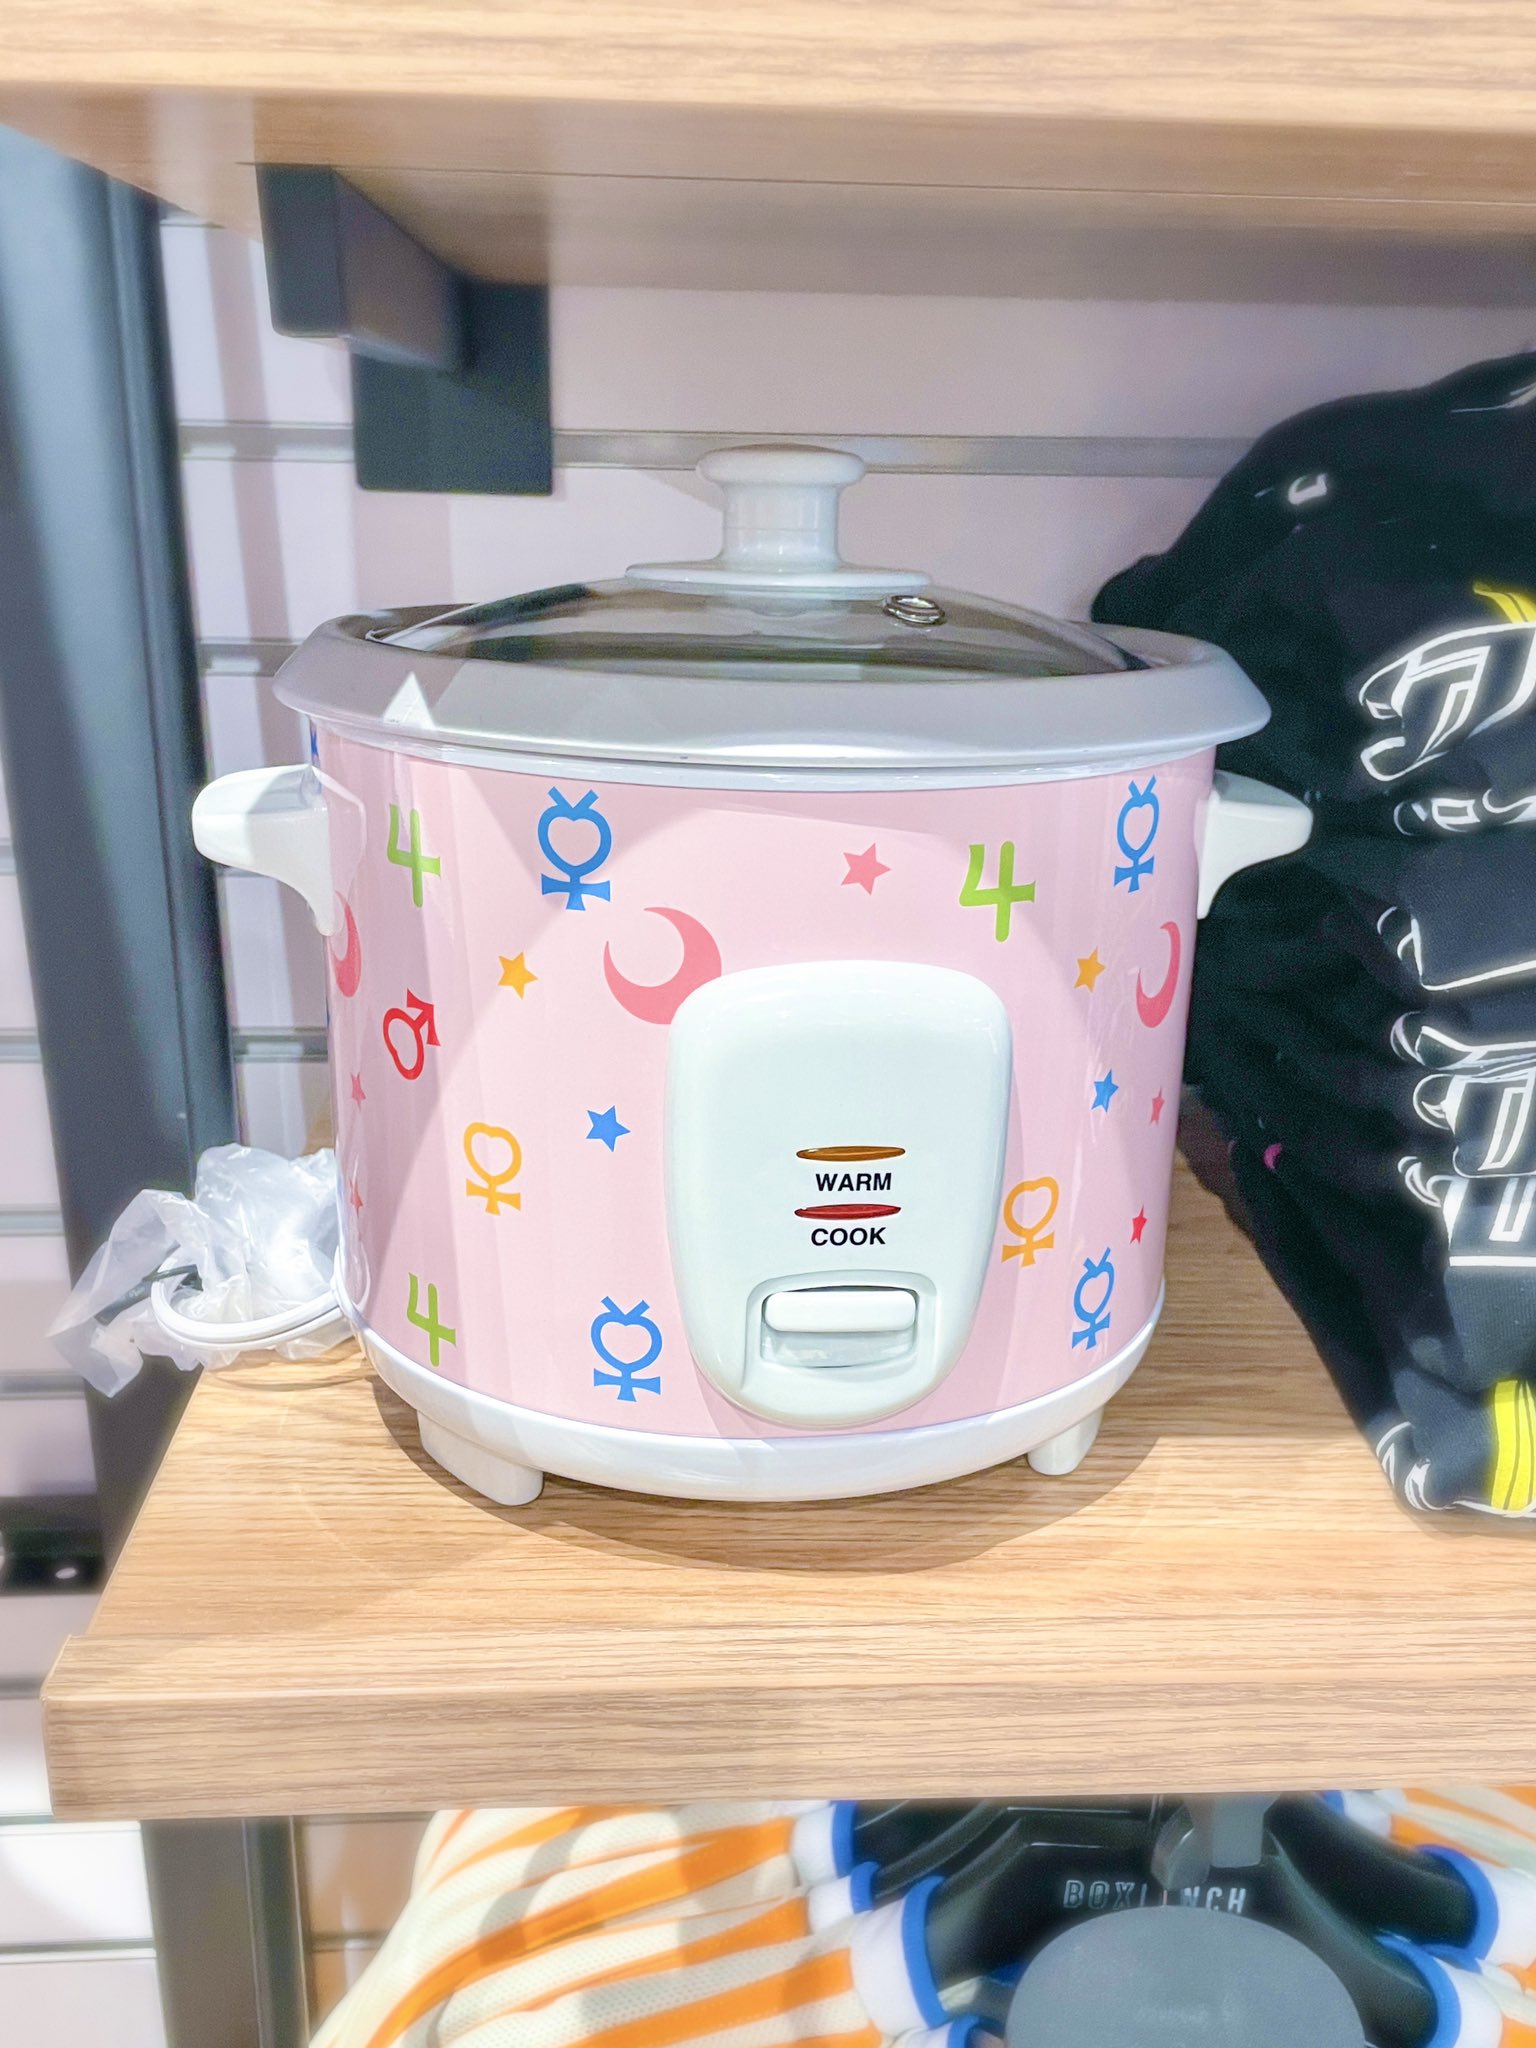 ✨🌙 Another Sailor Moon rice cooker from @boxlunchgifts ! They really make  everything Sailor Moon! 🌙✨ #sailormoon #セーラームーン #ricecooker